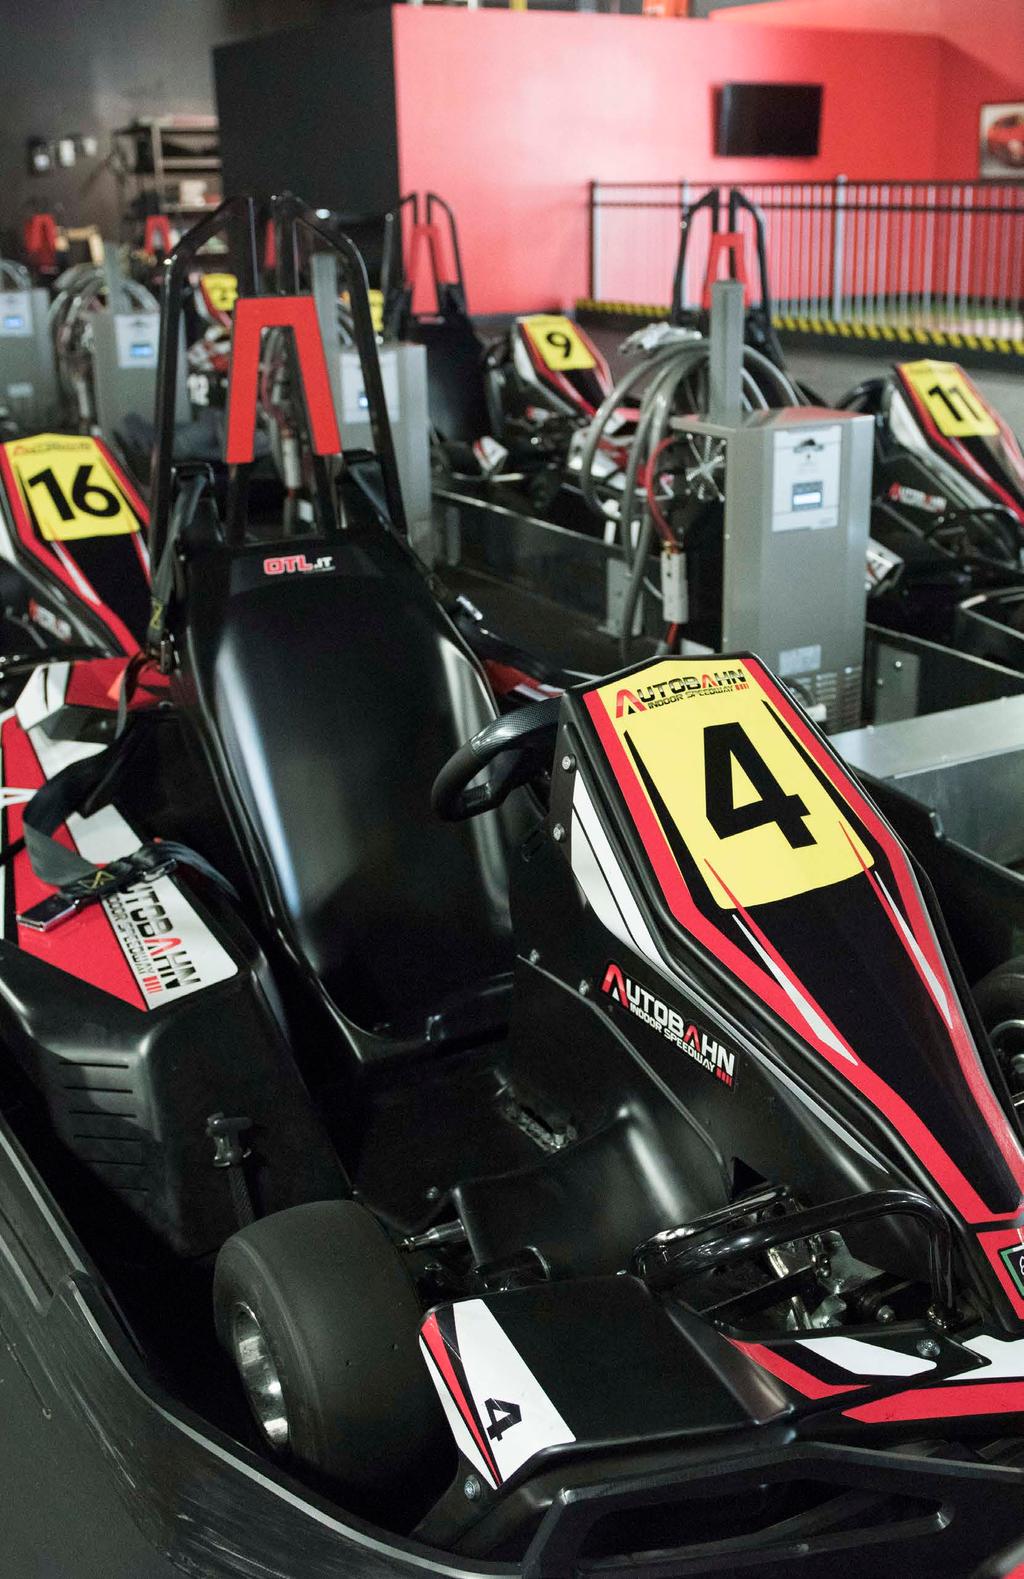 UP TO 50 MPH State of the art Italian-made, 3rd-generation Electric Karts Professional four-point safety racing harness Transponders on all karts allow for slow-down or full stop